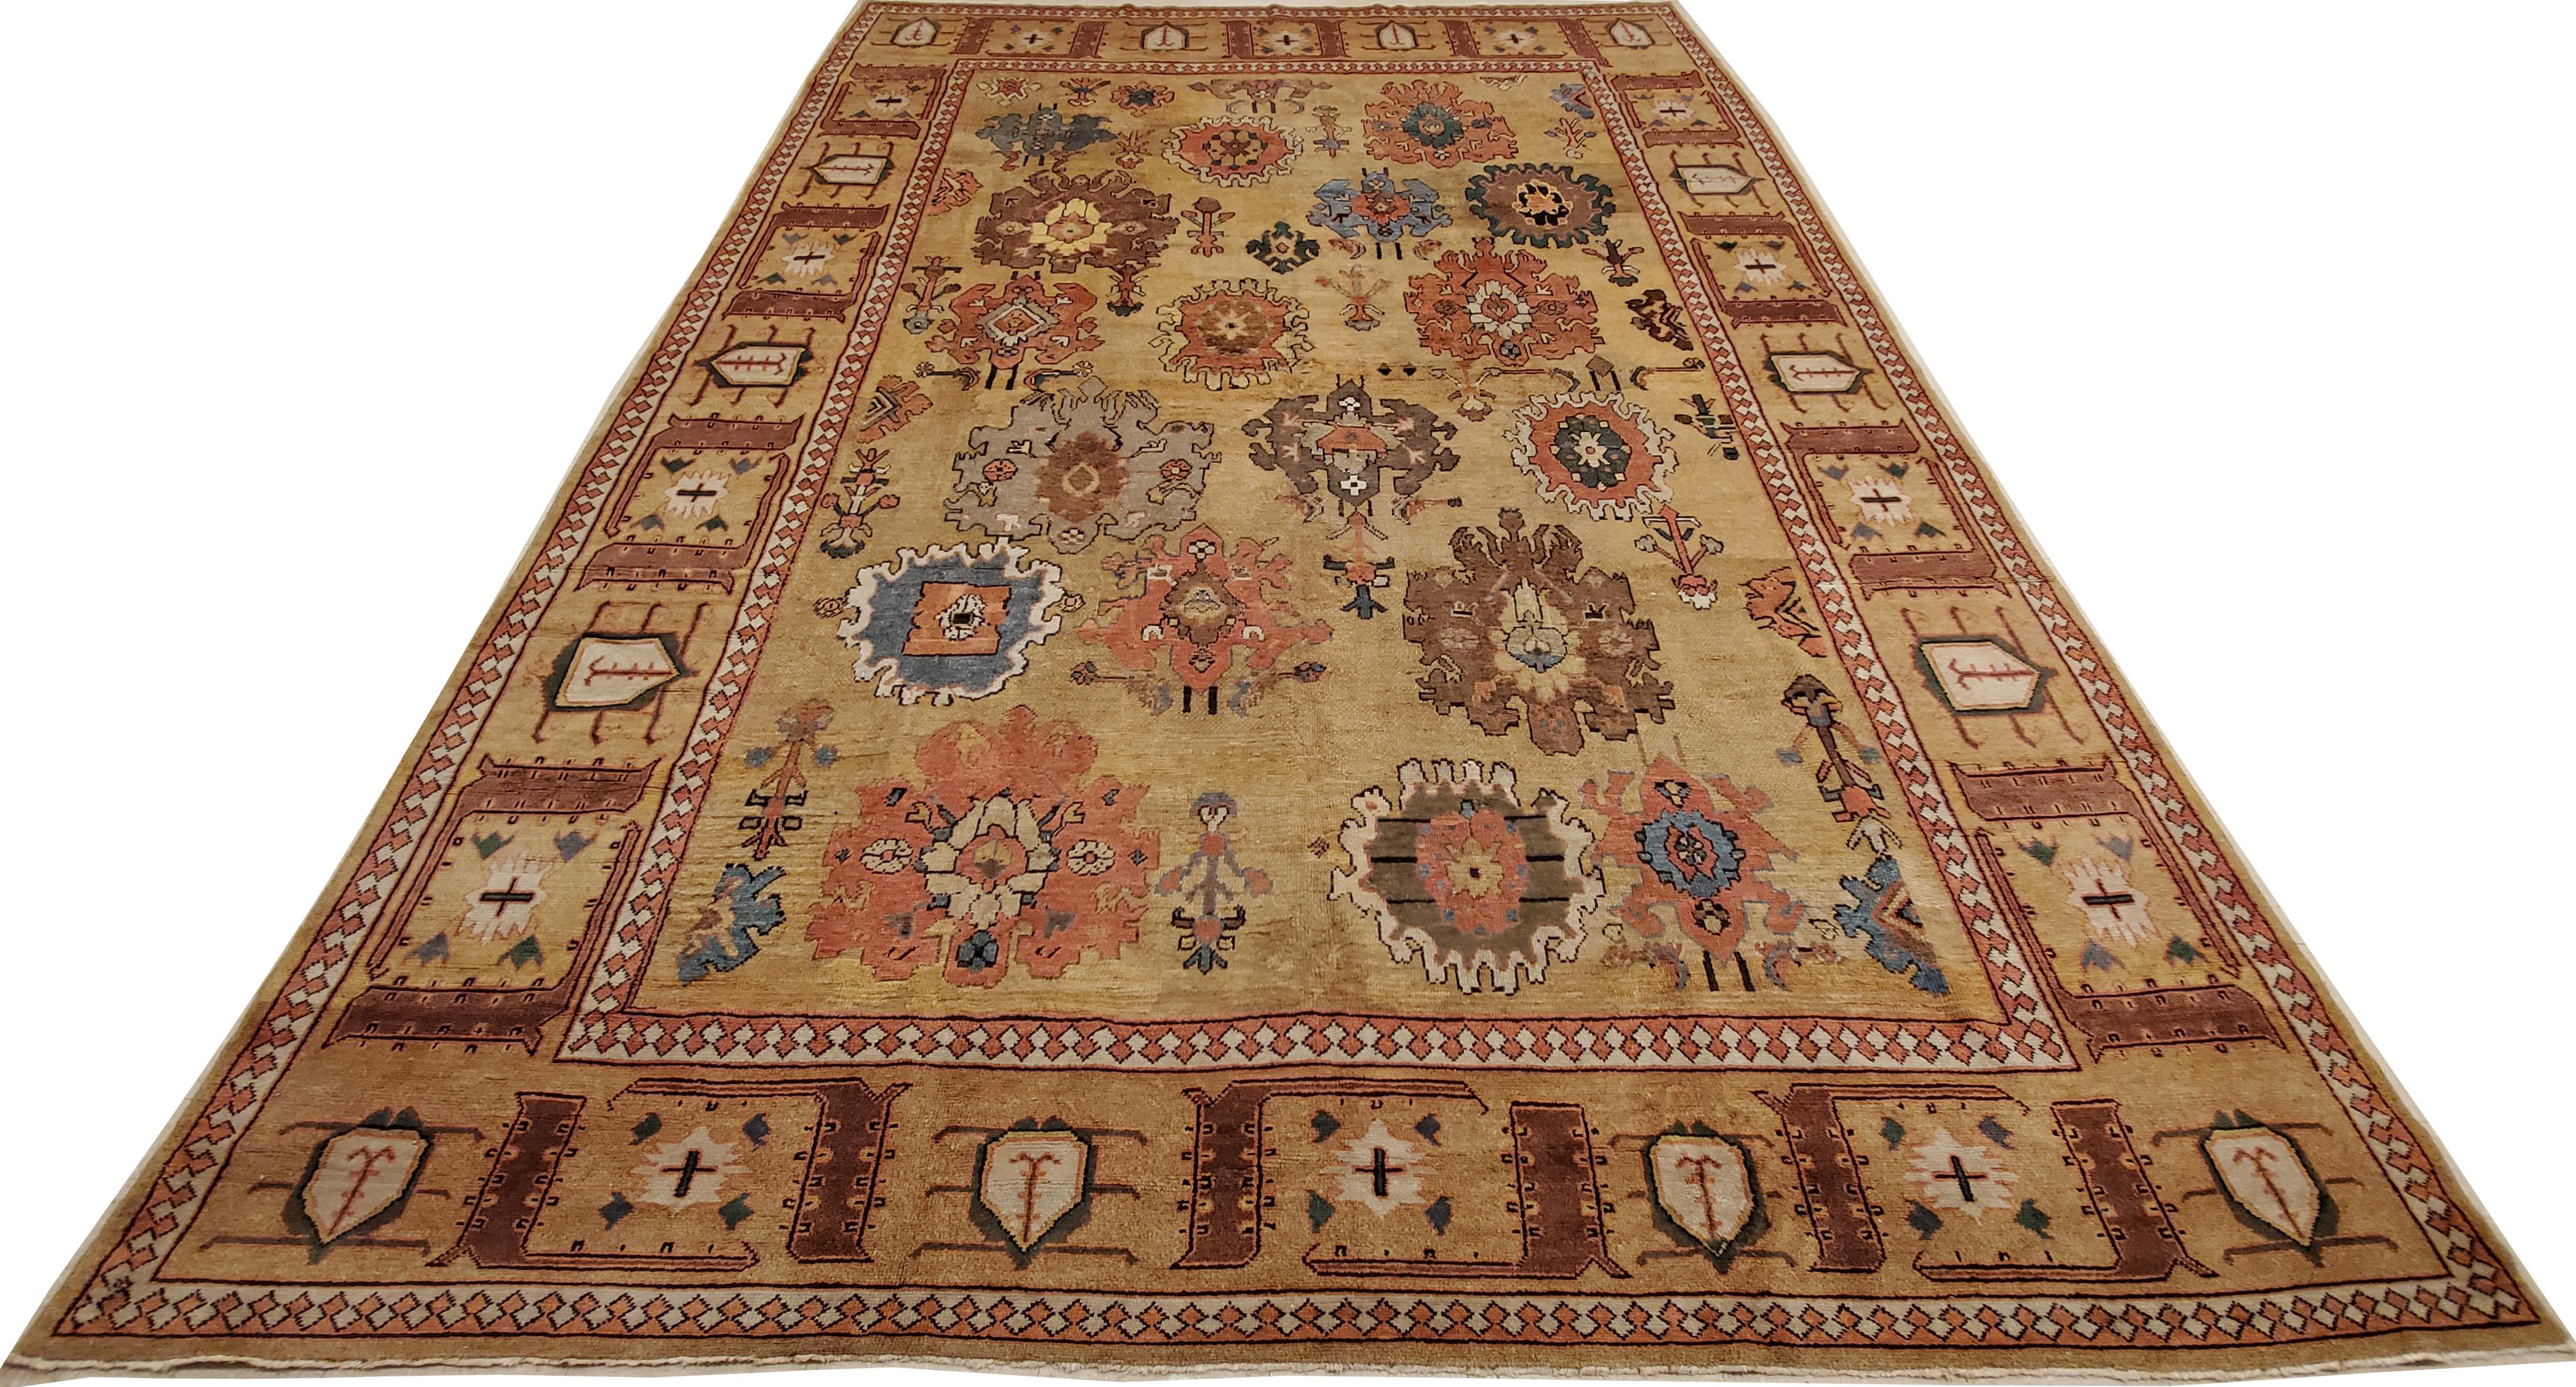 Hand-Knotted Antique Bakshaish Carpet, Oriental Persian Handmade in Tan Brown, Blue and Red For Sale